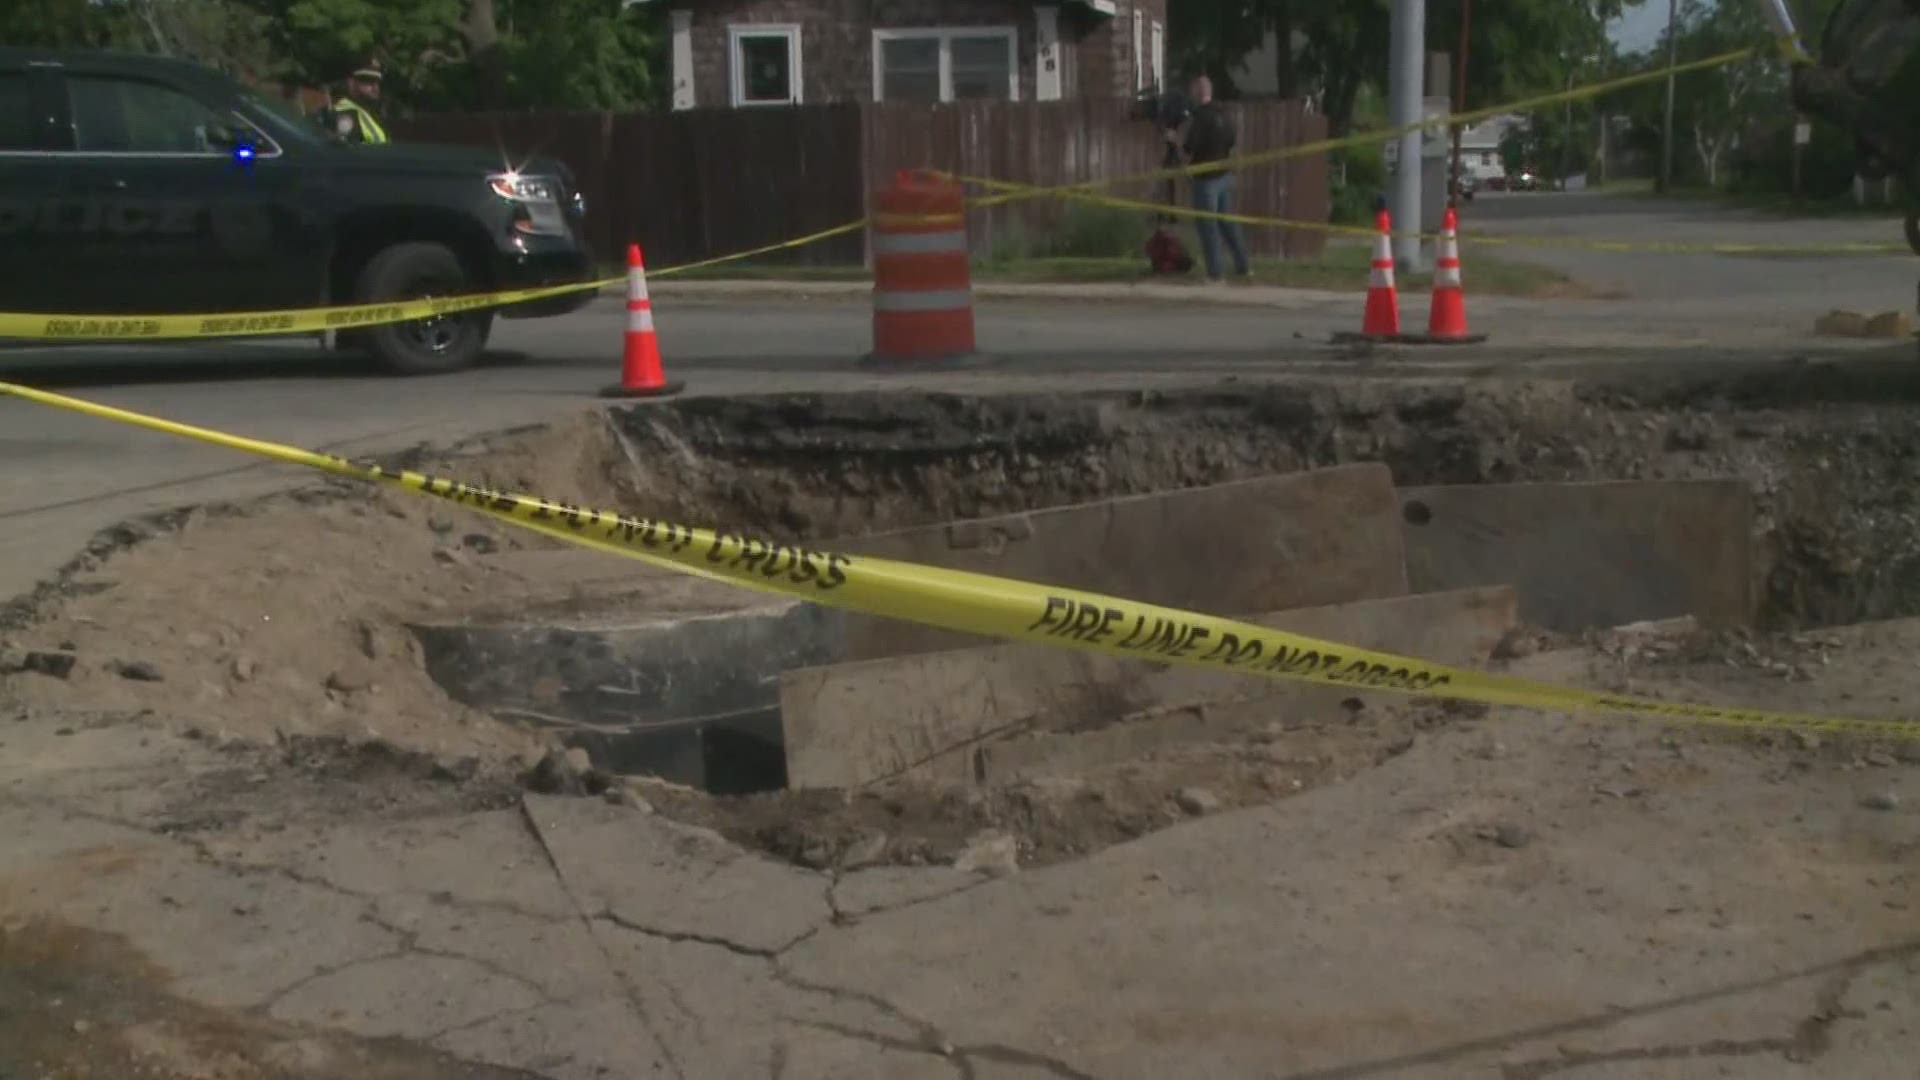 A construction worker in South Portland had to be pulled out of a trench that collapsed on top of him.